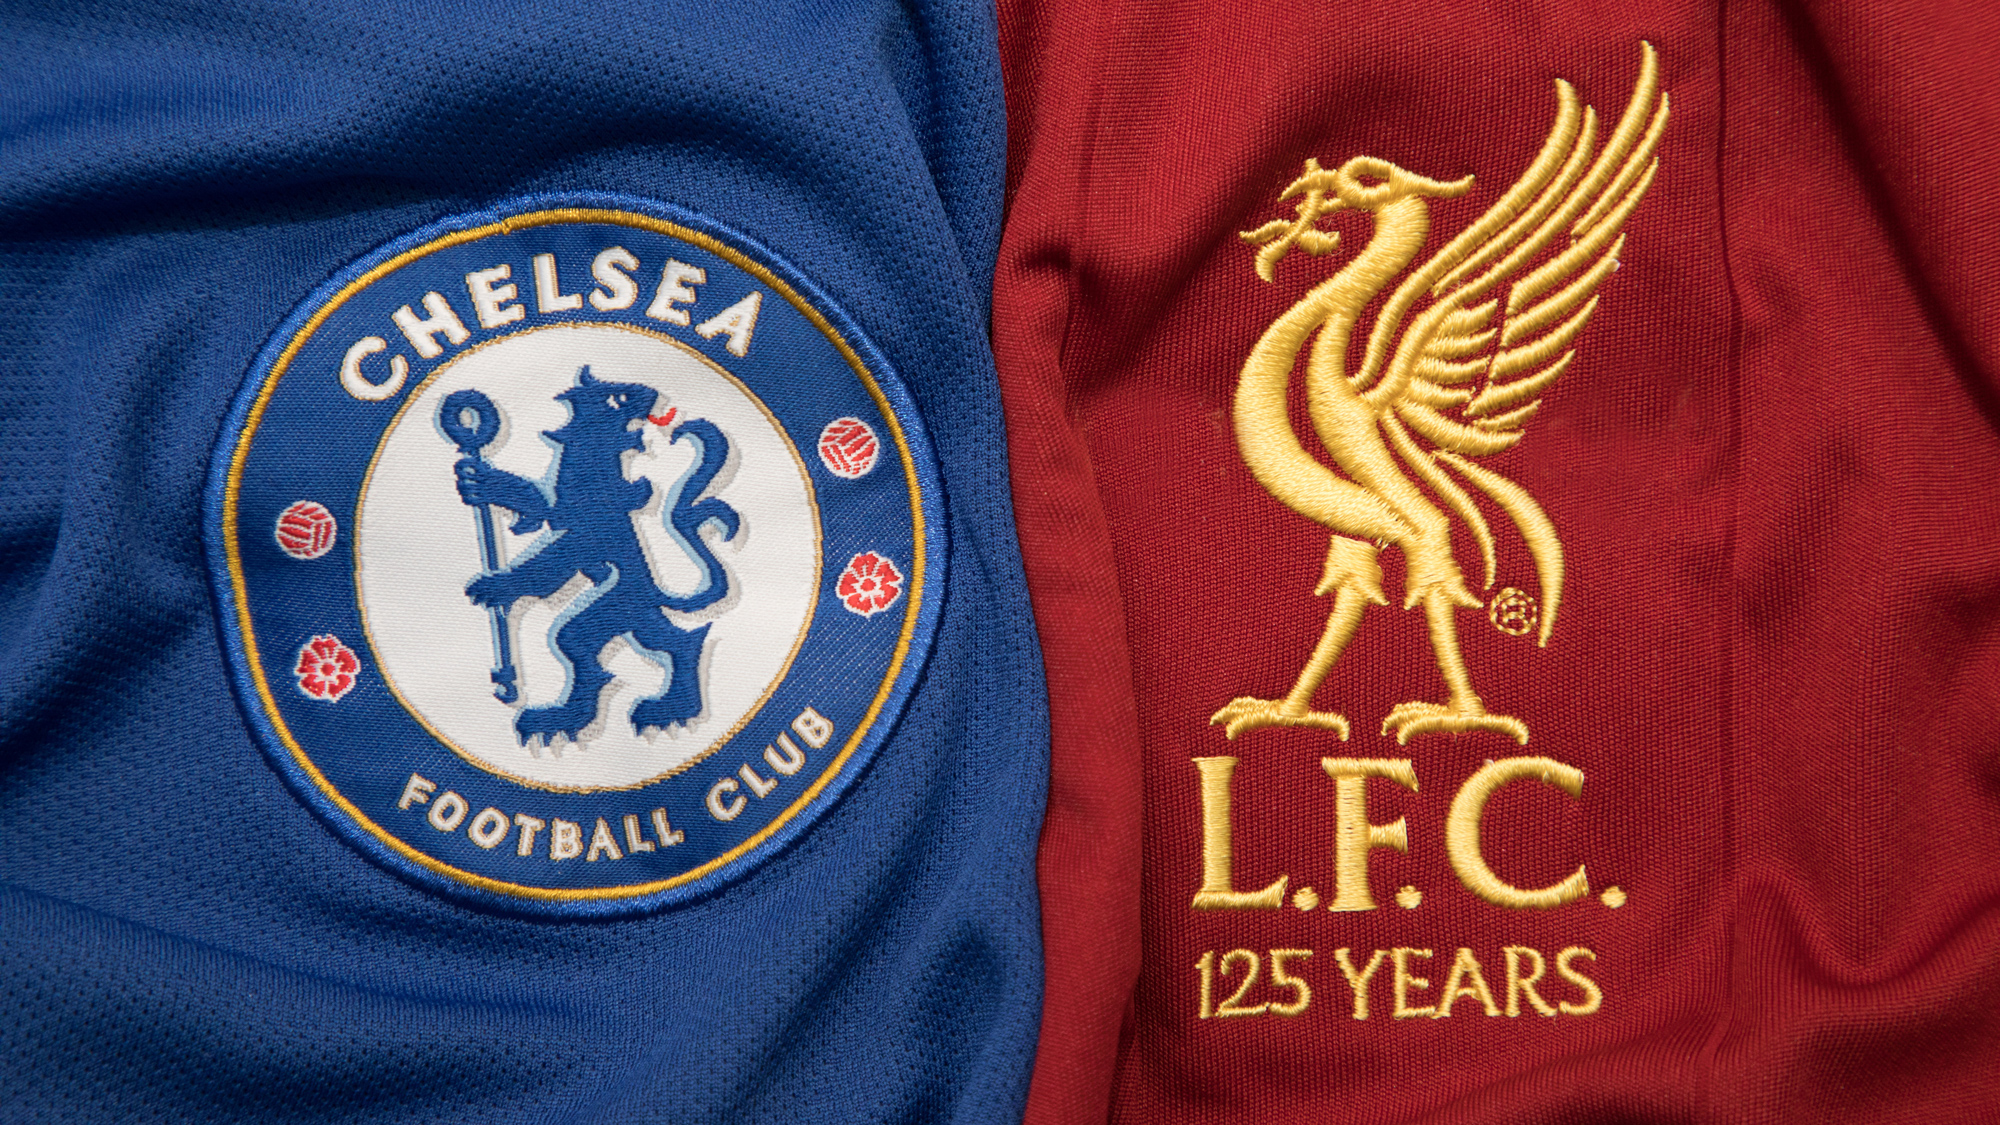 MATCH PREVIEW: CHELSEA VS LIVERPOOL